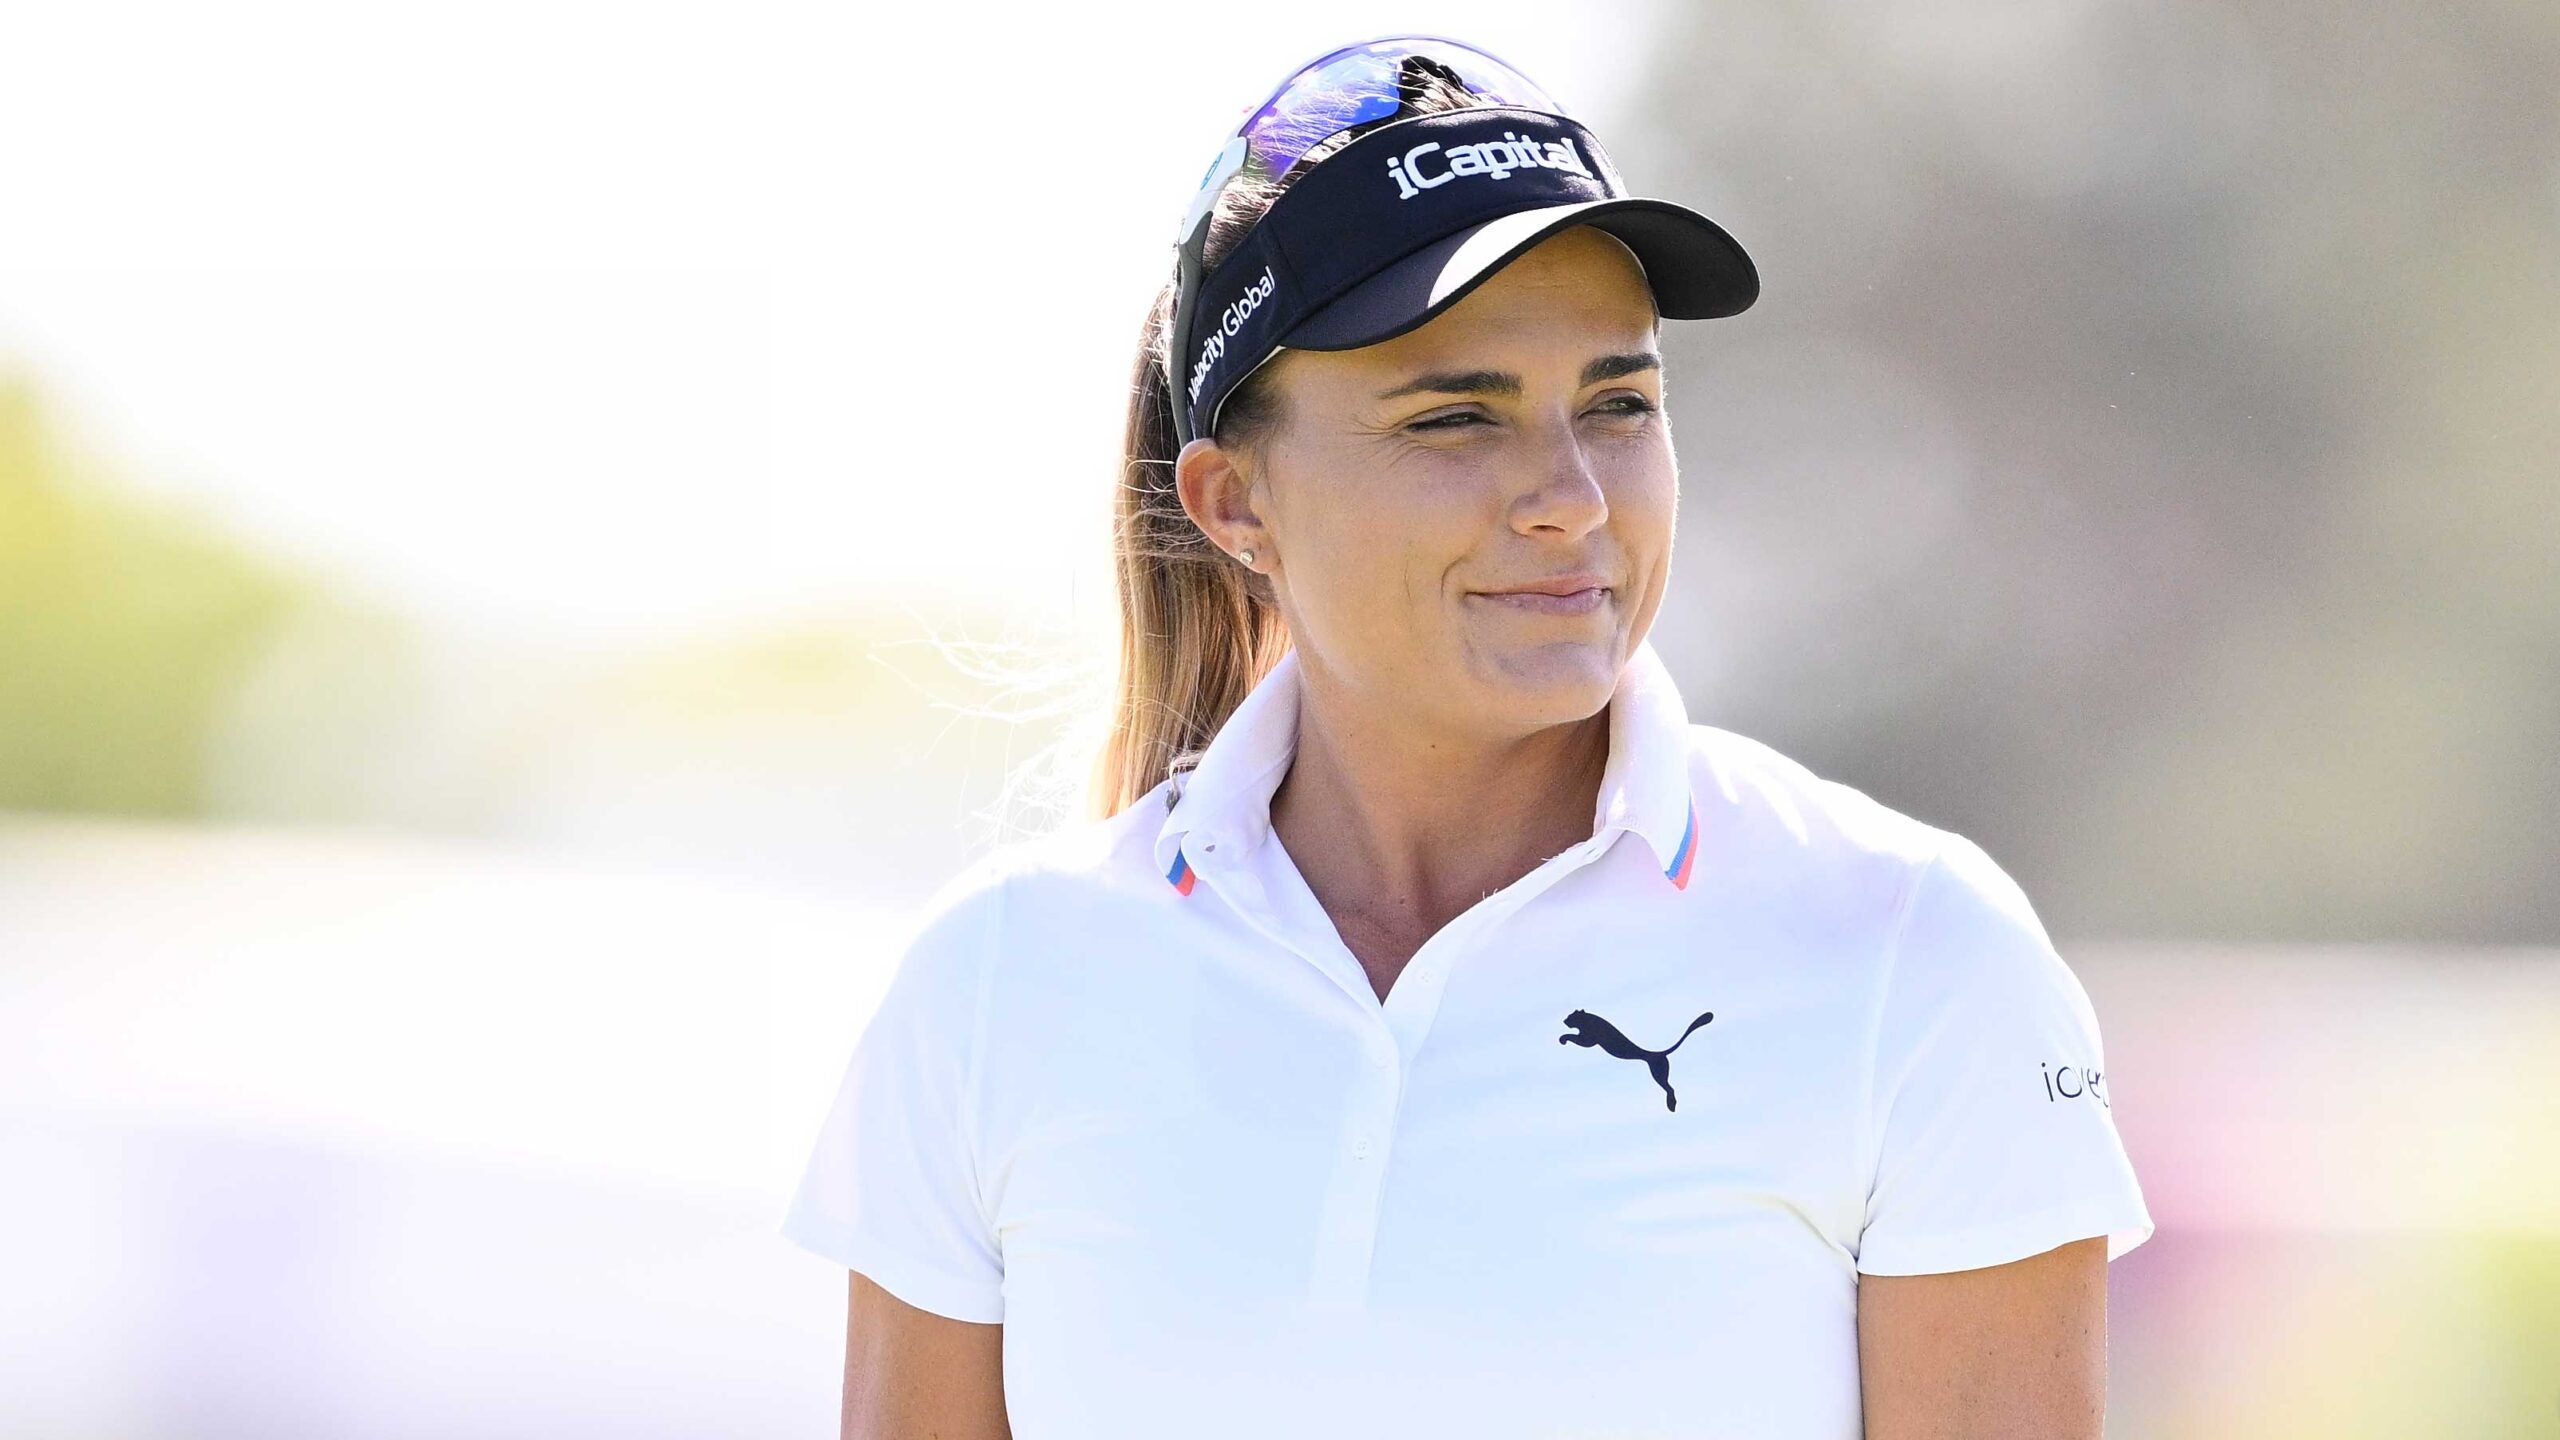 Lexi Thompson Receives Surprise Invitation to Play in Shriners Children